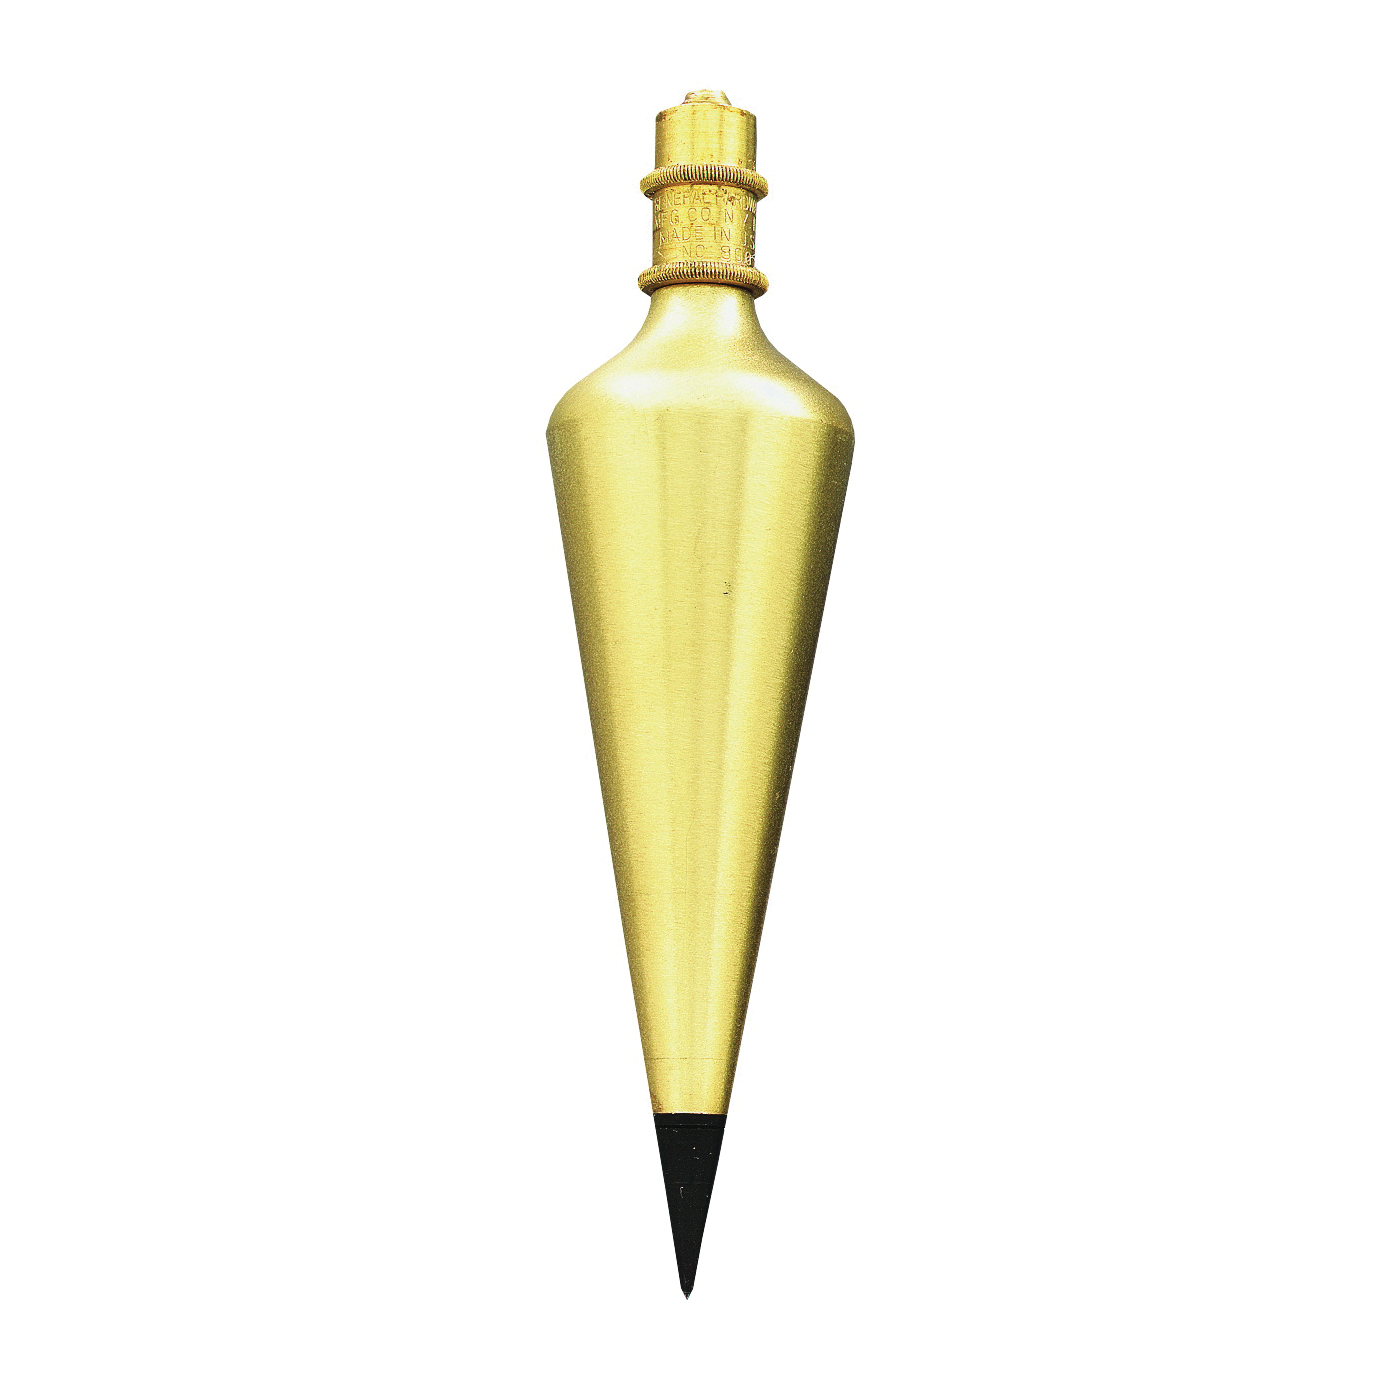 General 800-16 Plumb Bob, Solid Brass, Lacquered